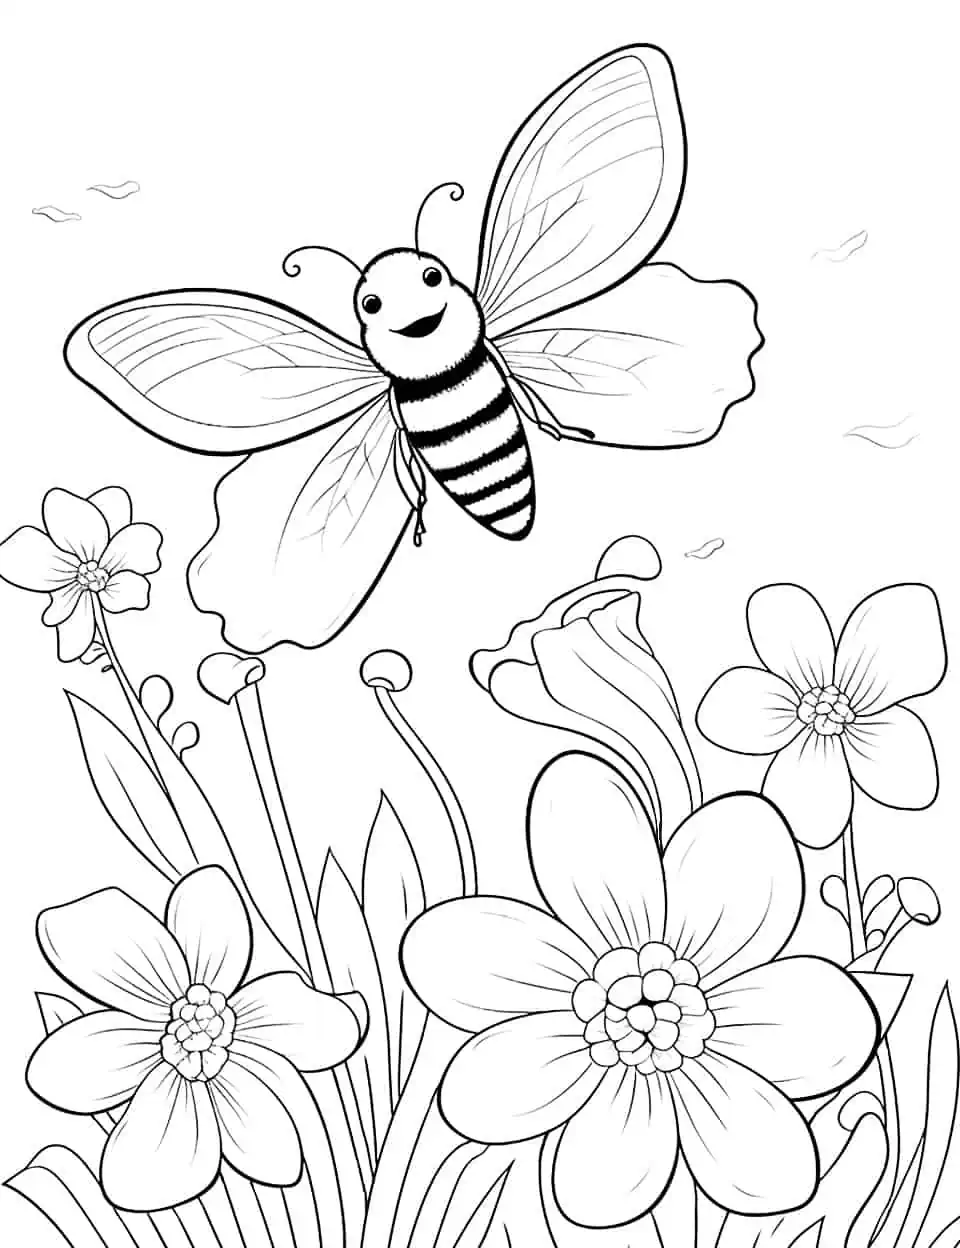 Bees and Spring Flowers Coloring Page - A detailed coloring sheet featuring bees buzzing around blooming spring flowers for kids.